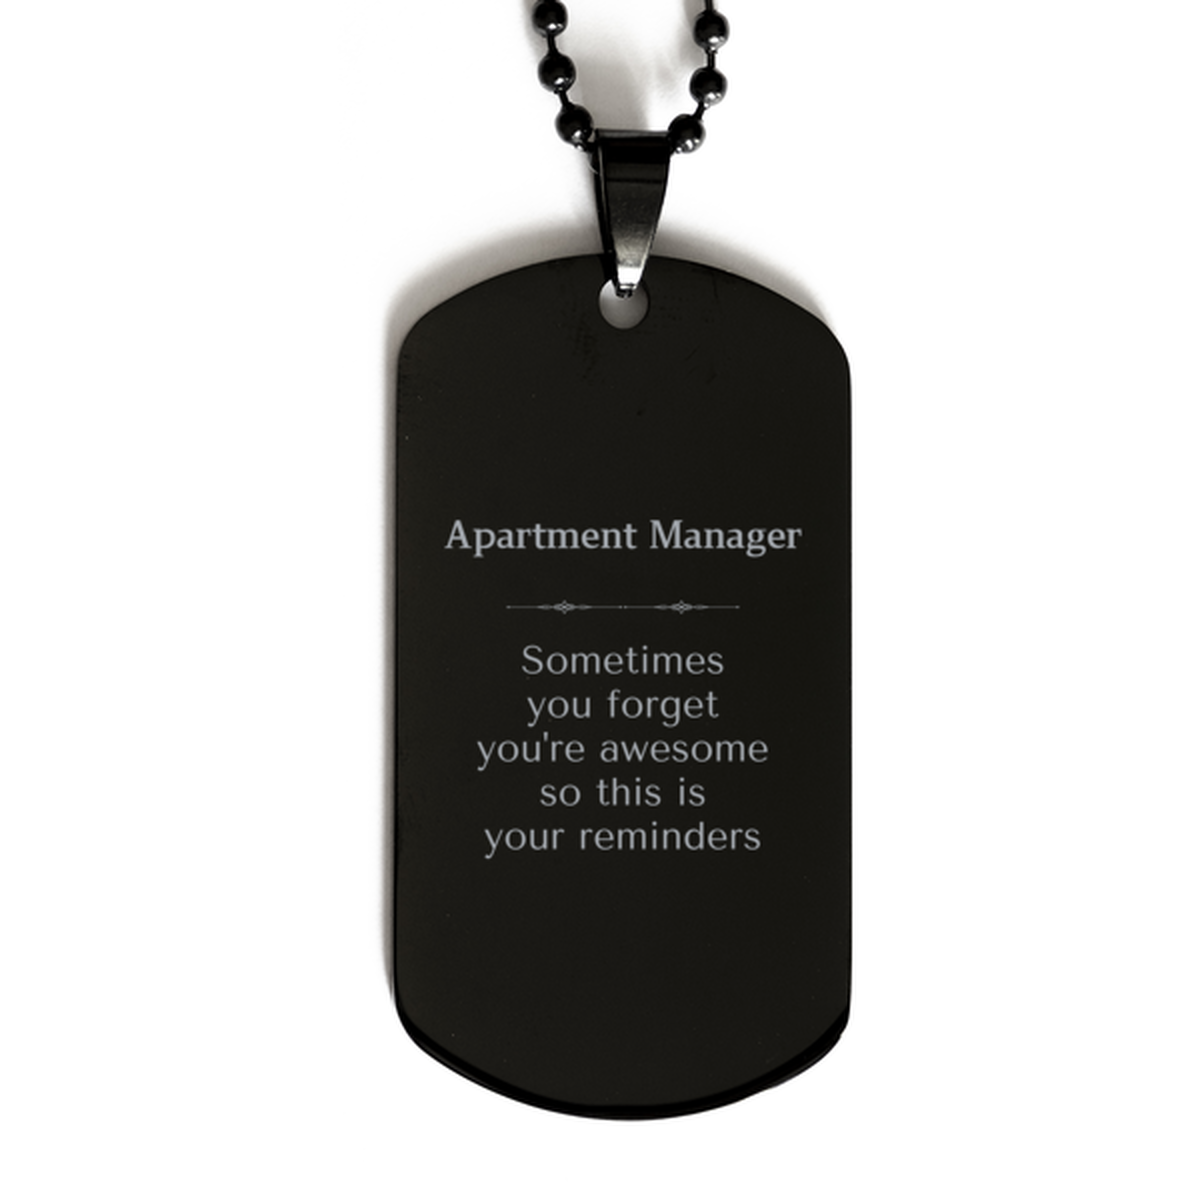 Sentimental Apartment Manager Black Dog Tag, Apartment Manager Sometimes you forget you're awesome so this is your reminders, Graduation Christmas Birthday Gifts for Apartment Manager, Men, Women, Coworkers